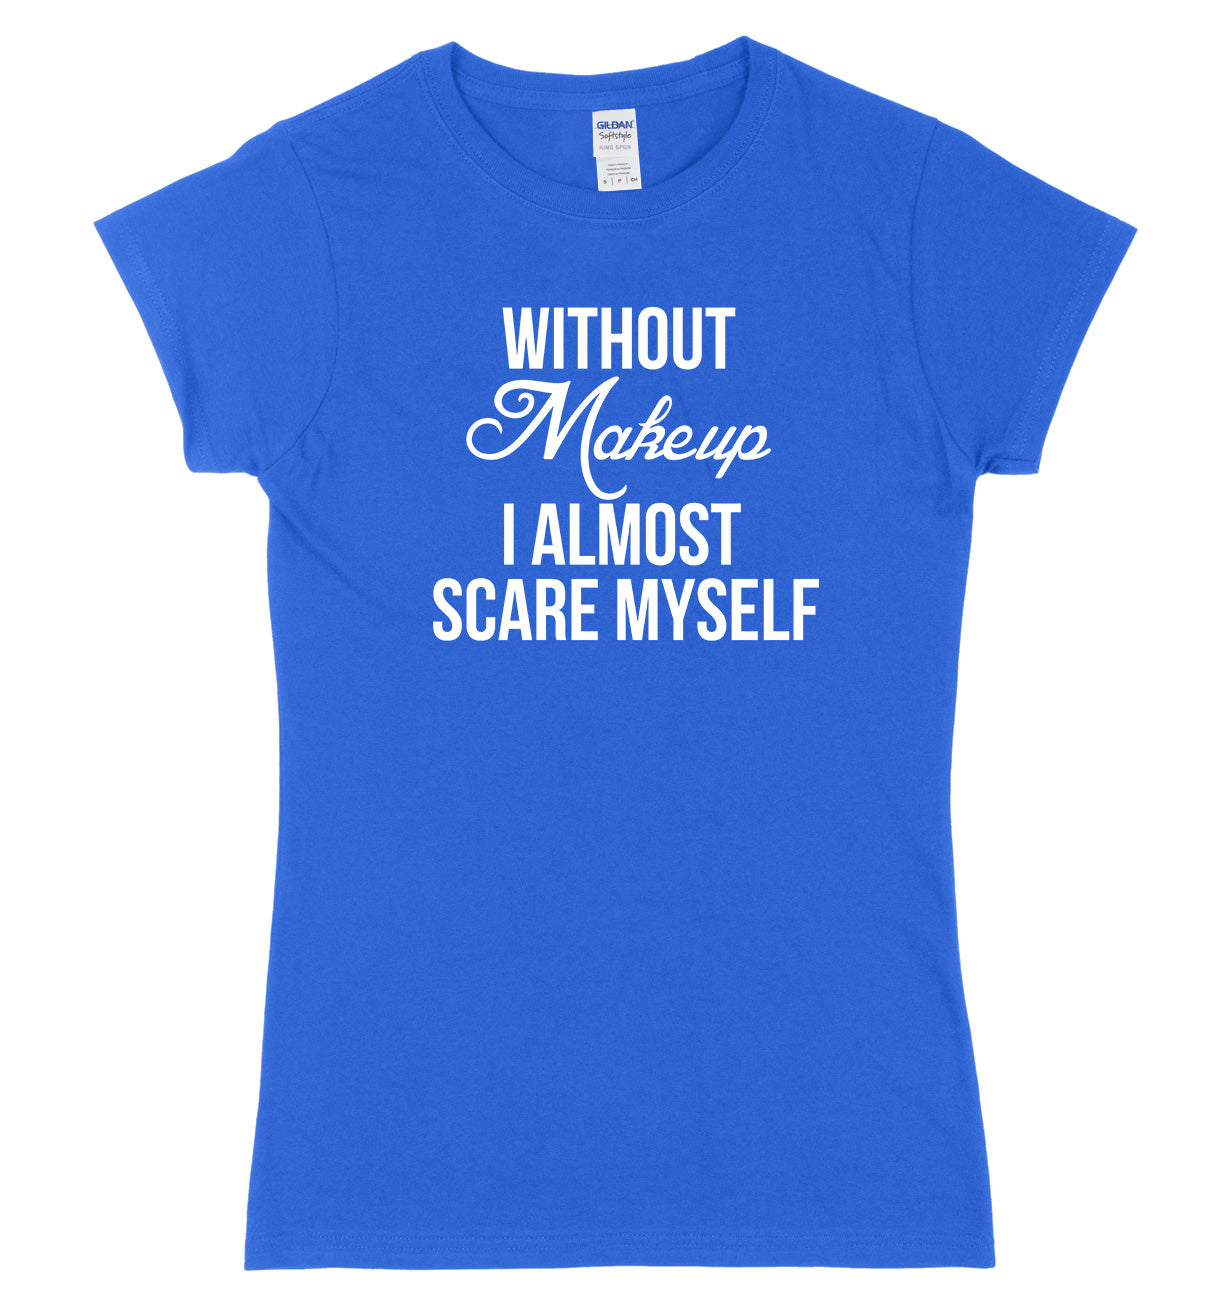 Without Makeup I Almost Scare Myself Womens Ladies Slim Fit Halloween T-Shirt